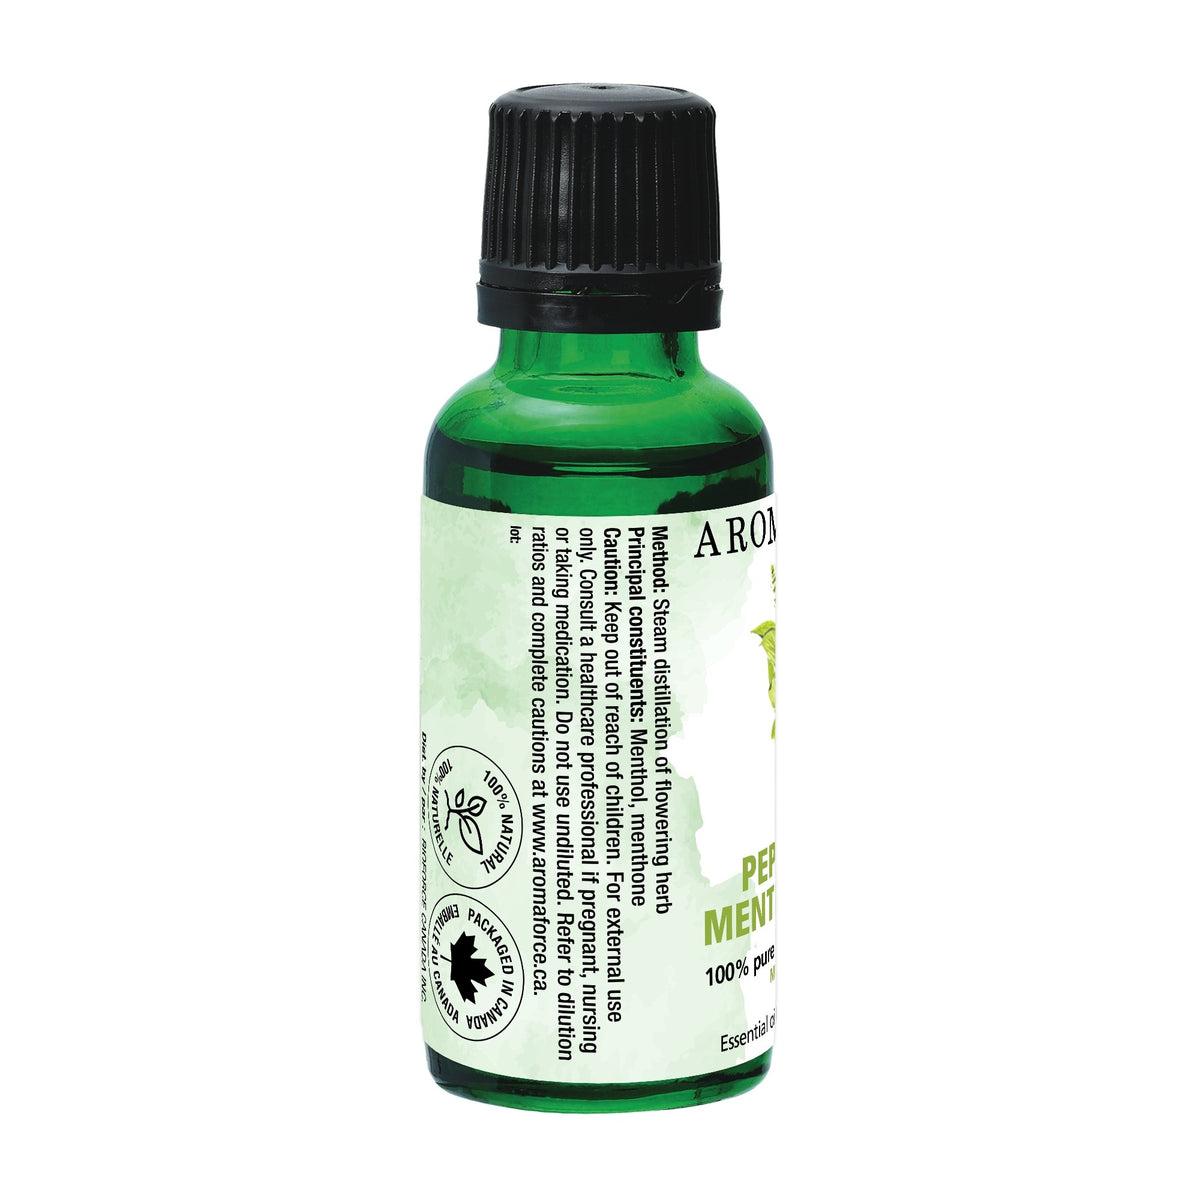 Aromaforce Peppermint Essential Oil 30mL - A.Vogel Canada